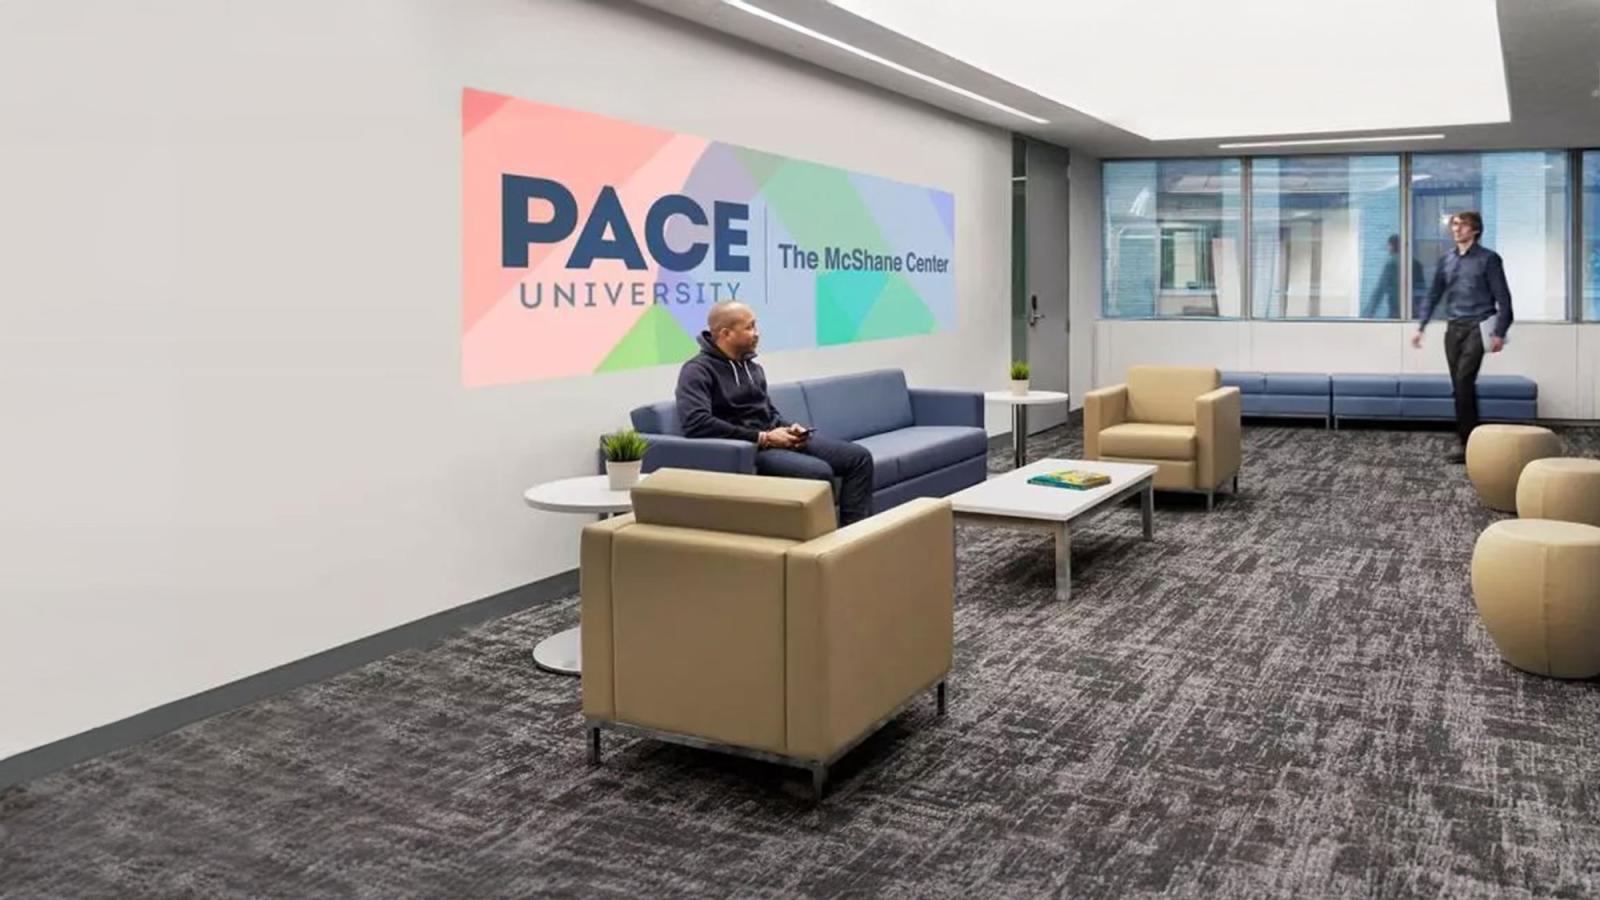 Pace University's McShane Center lobby with a person sitting in a chair being greeted by another